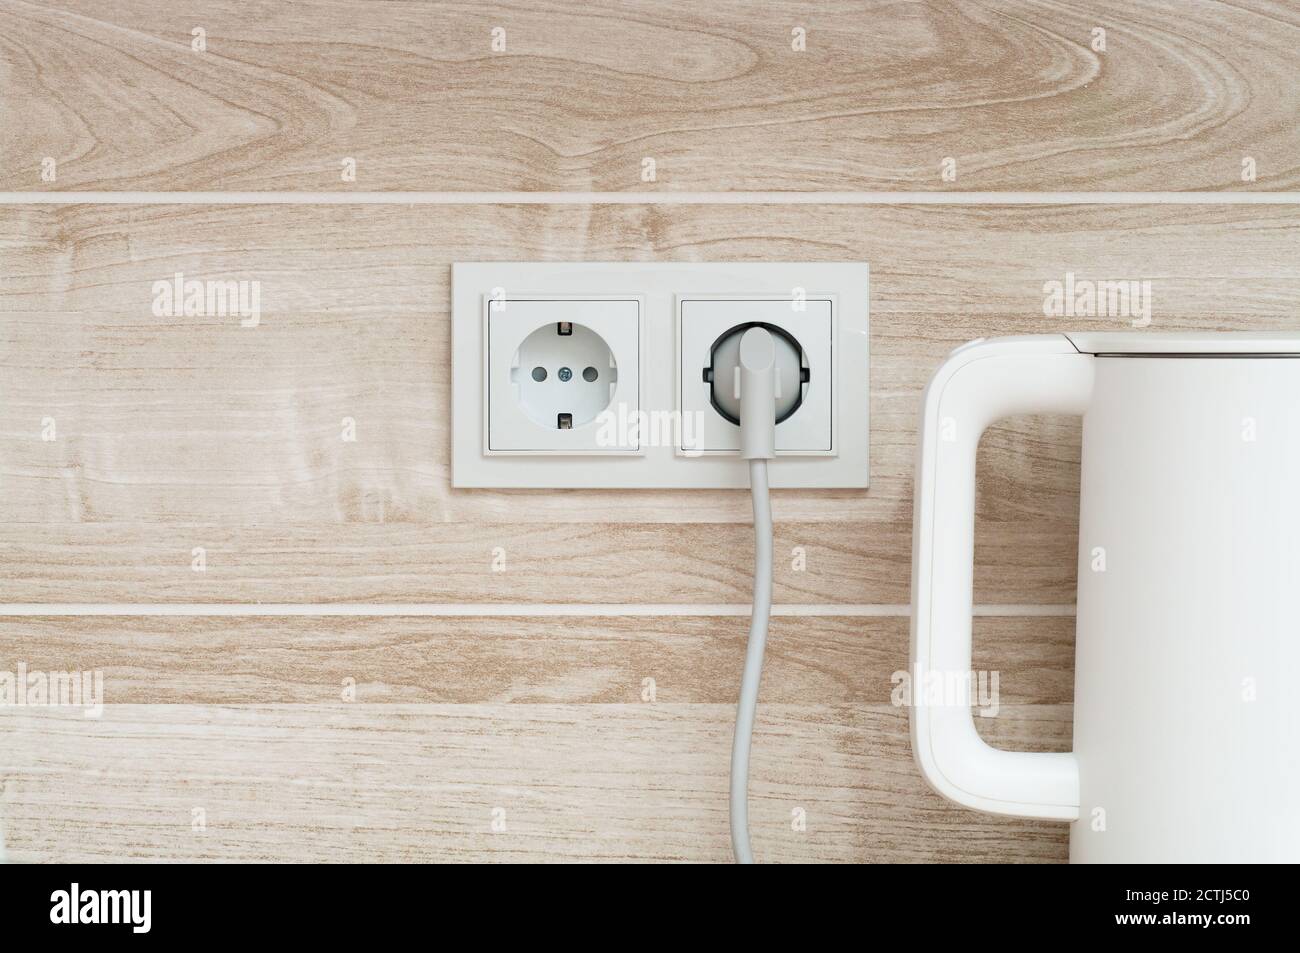 https://c8.alamy.com/comp/2CTJ5C0/white-electric-kettle-plugged-into-a-power-outlet-on-a-wall-into-a-kitchen-2CTJ5C0.jpg